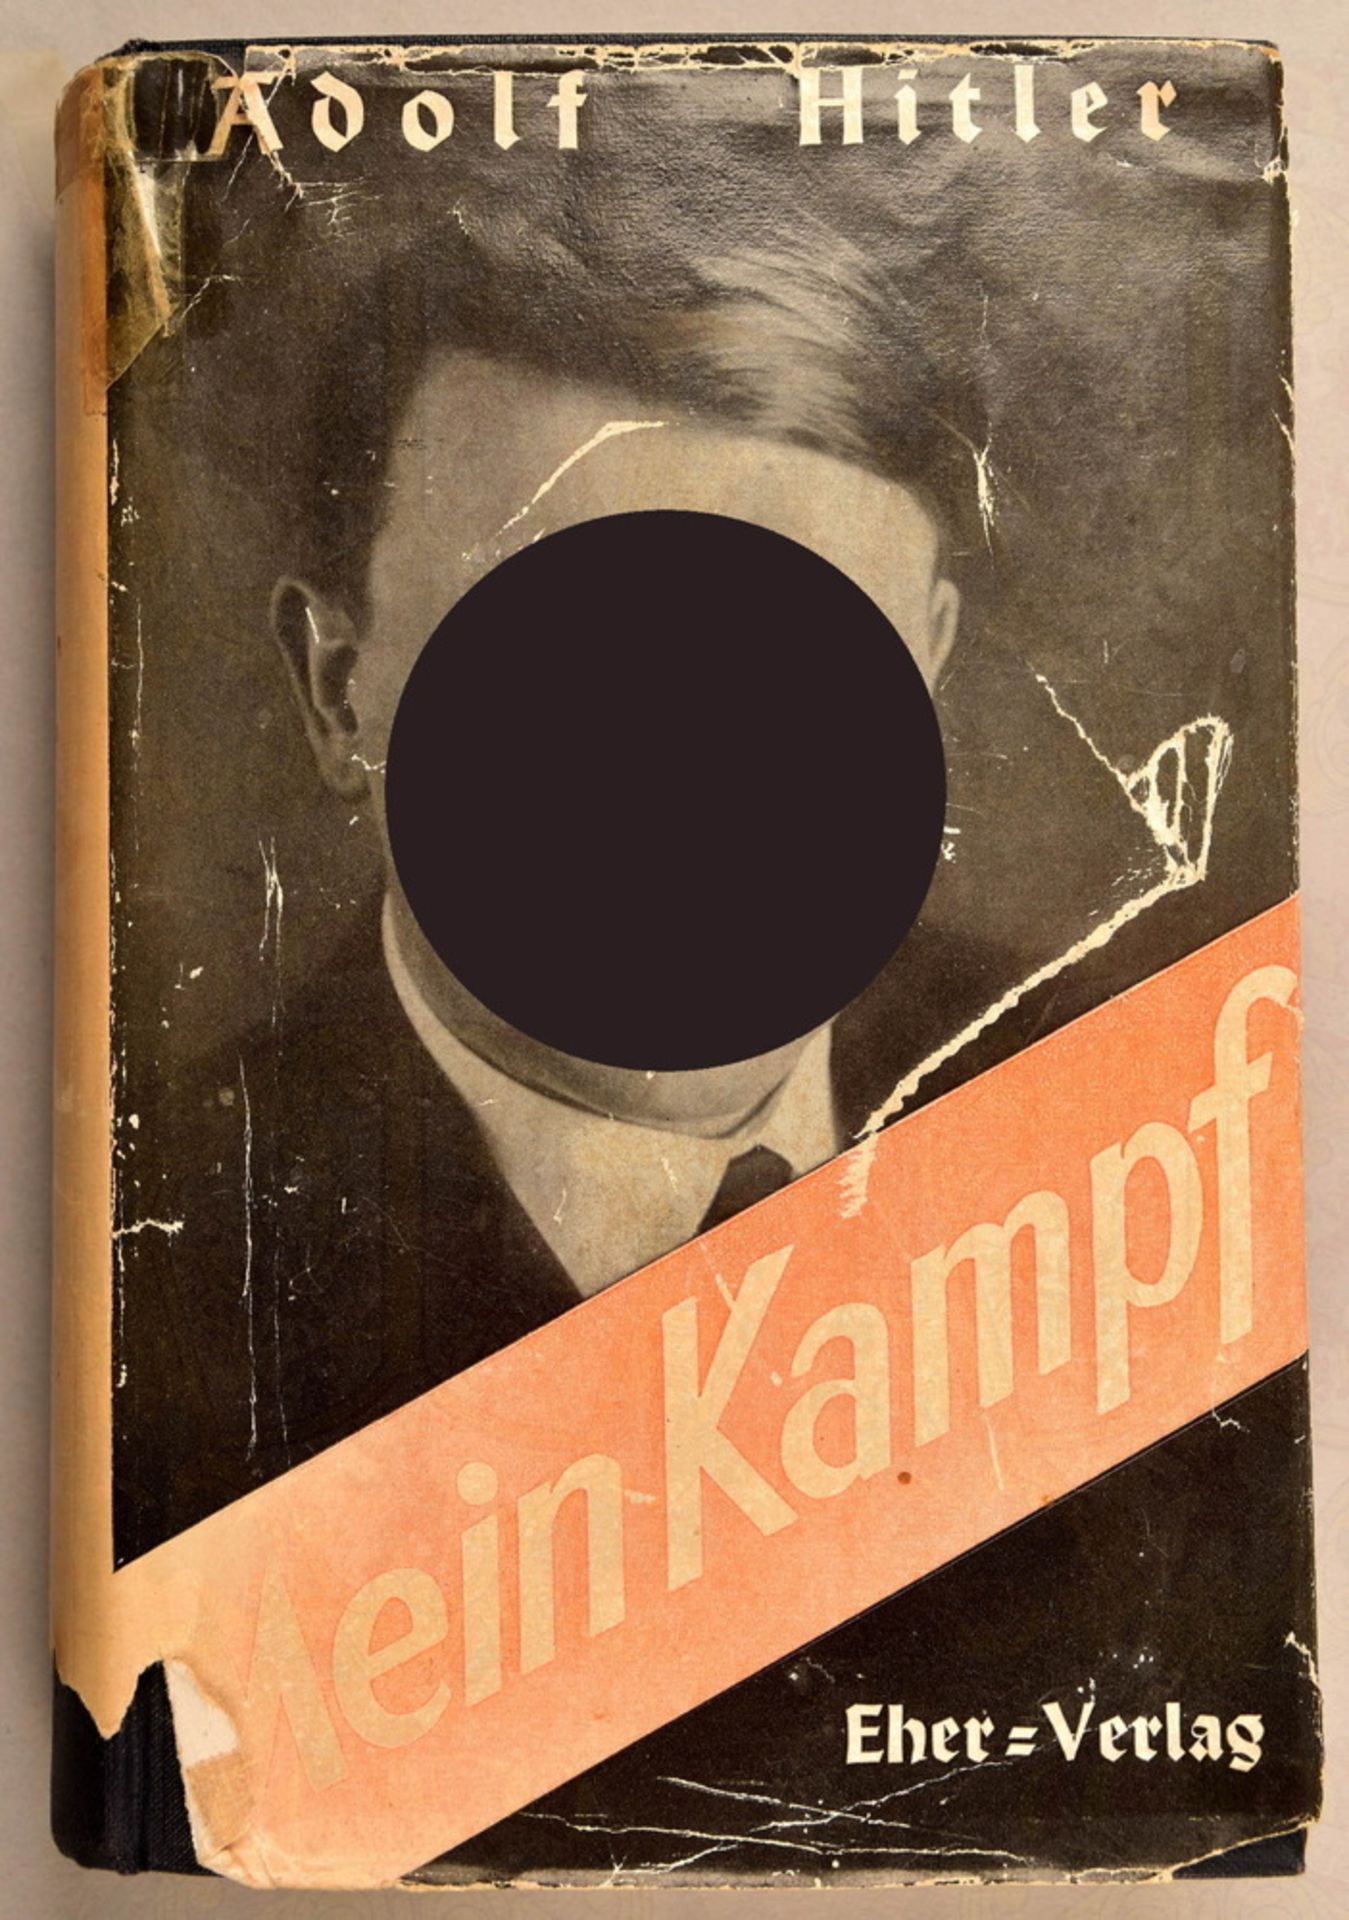 M. K. Peoples edition of 1939 with Dutch owner entry 1941